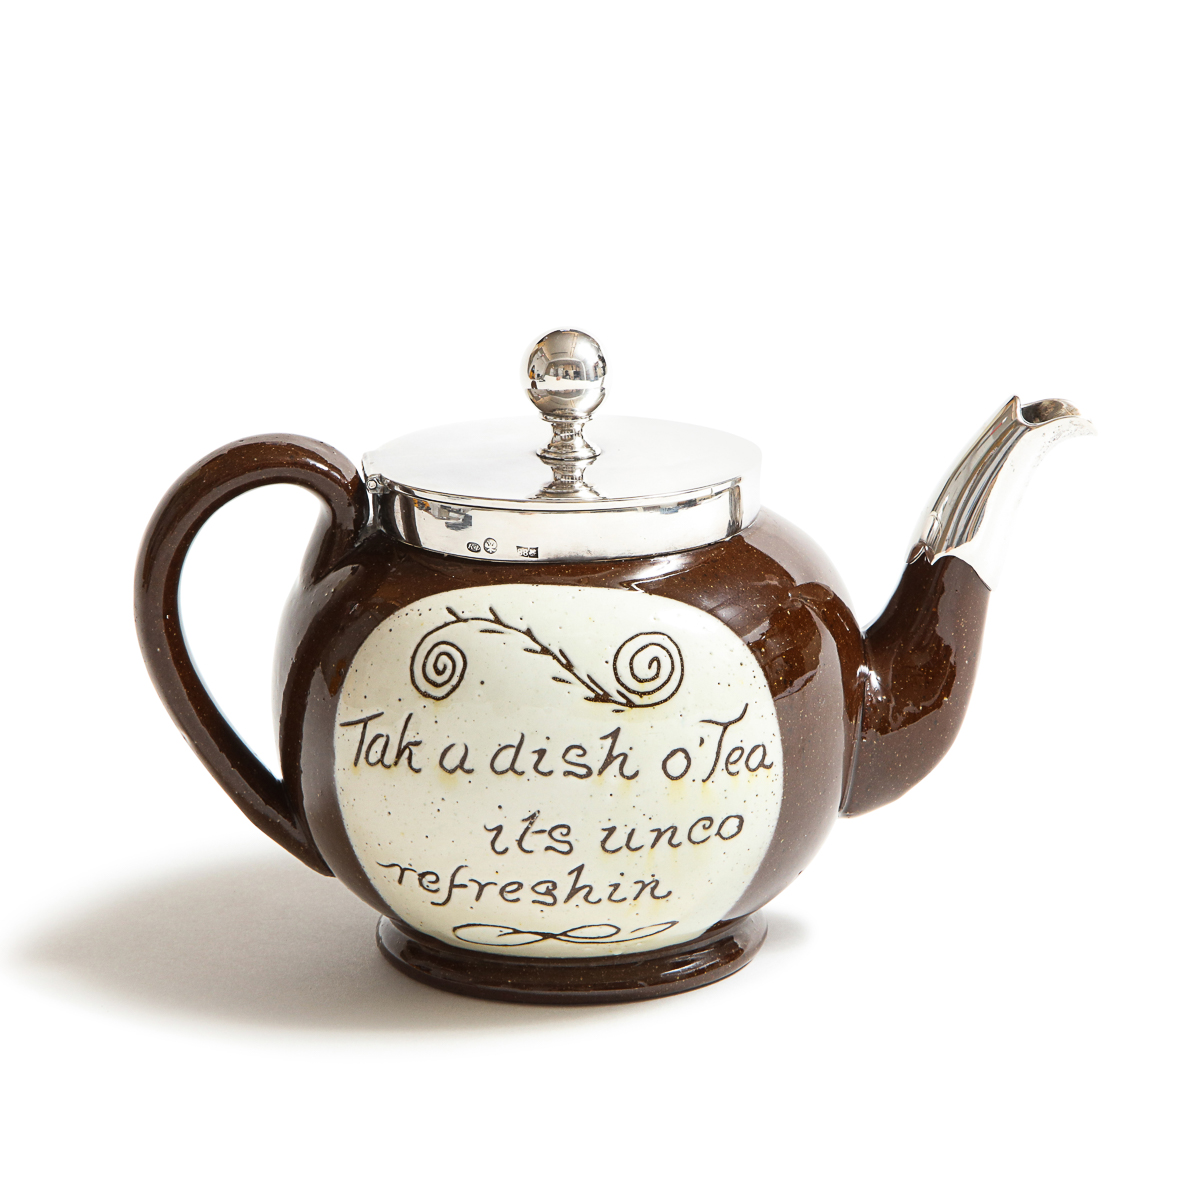 teapot only view of set of FabergÃ© Scottish Cumnock Pottery Motto Ware Teapot and Sugar Bowl